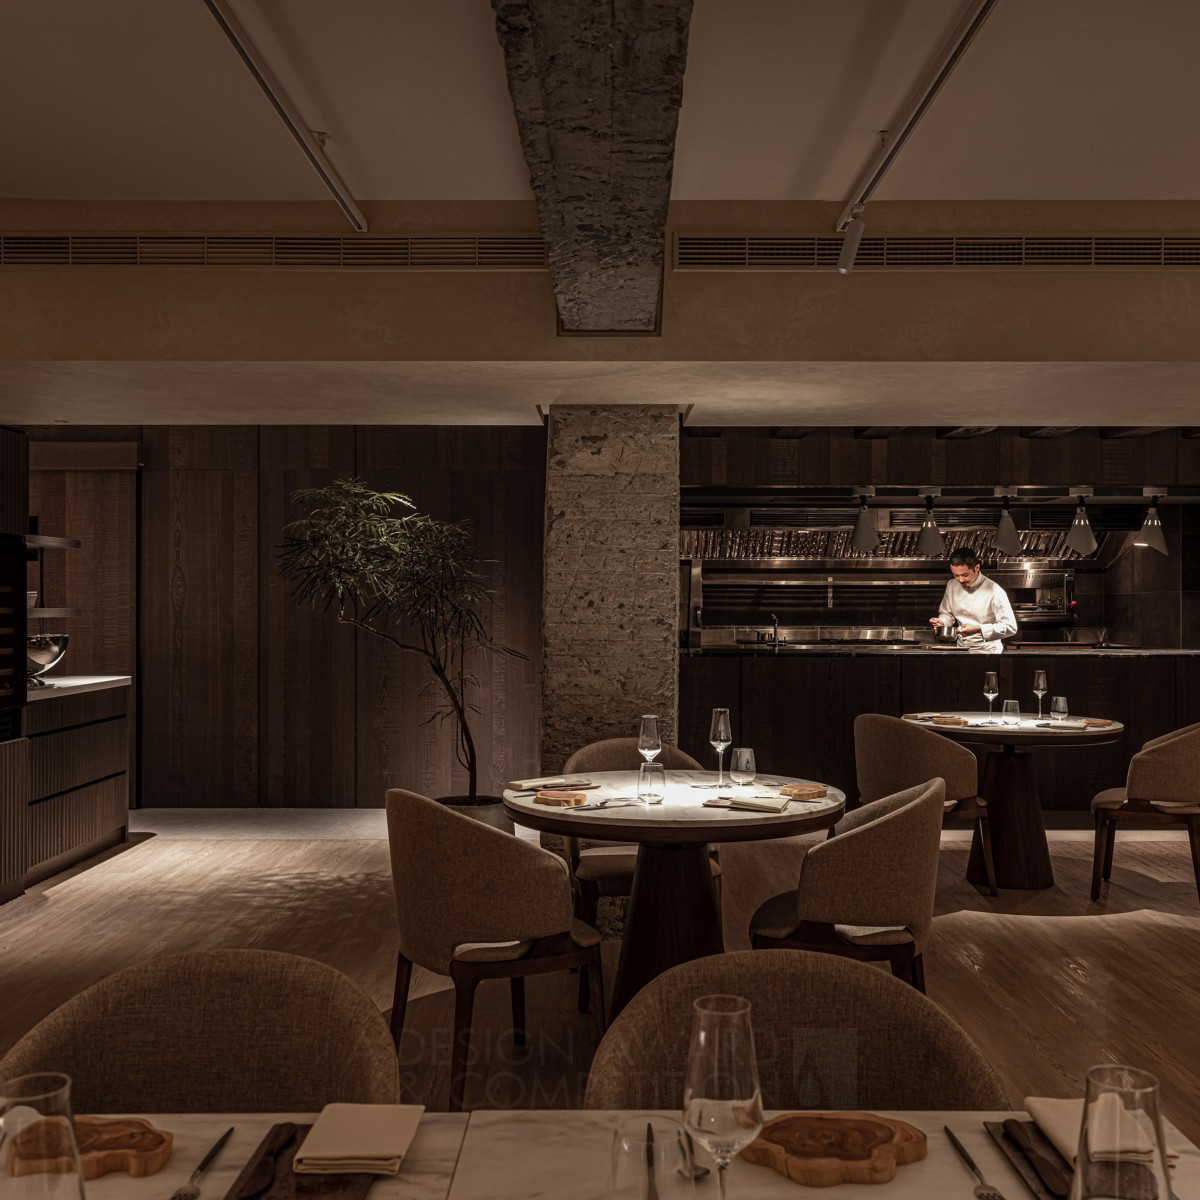 Chia Yu Chan wins Silver at the prestigious A' Interior Space, Retail and Exhibition Design Award with Ecru Restaurant.